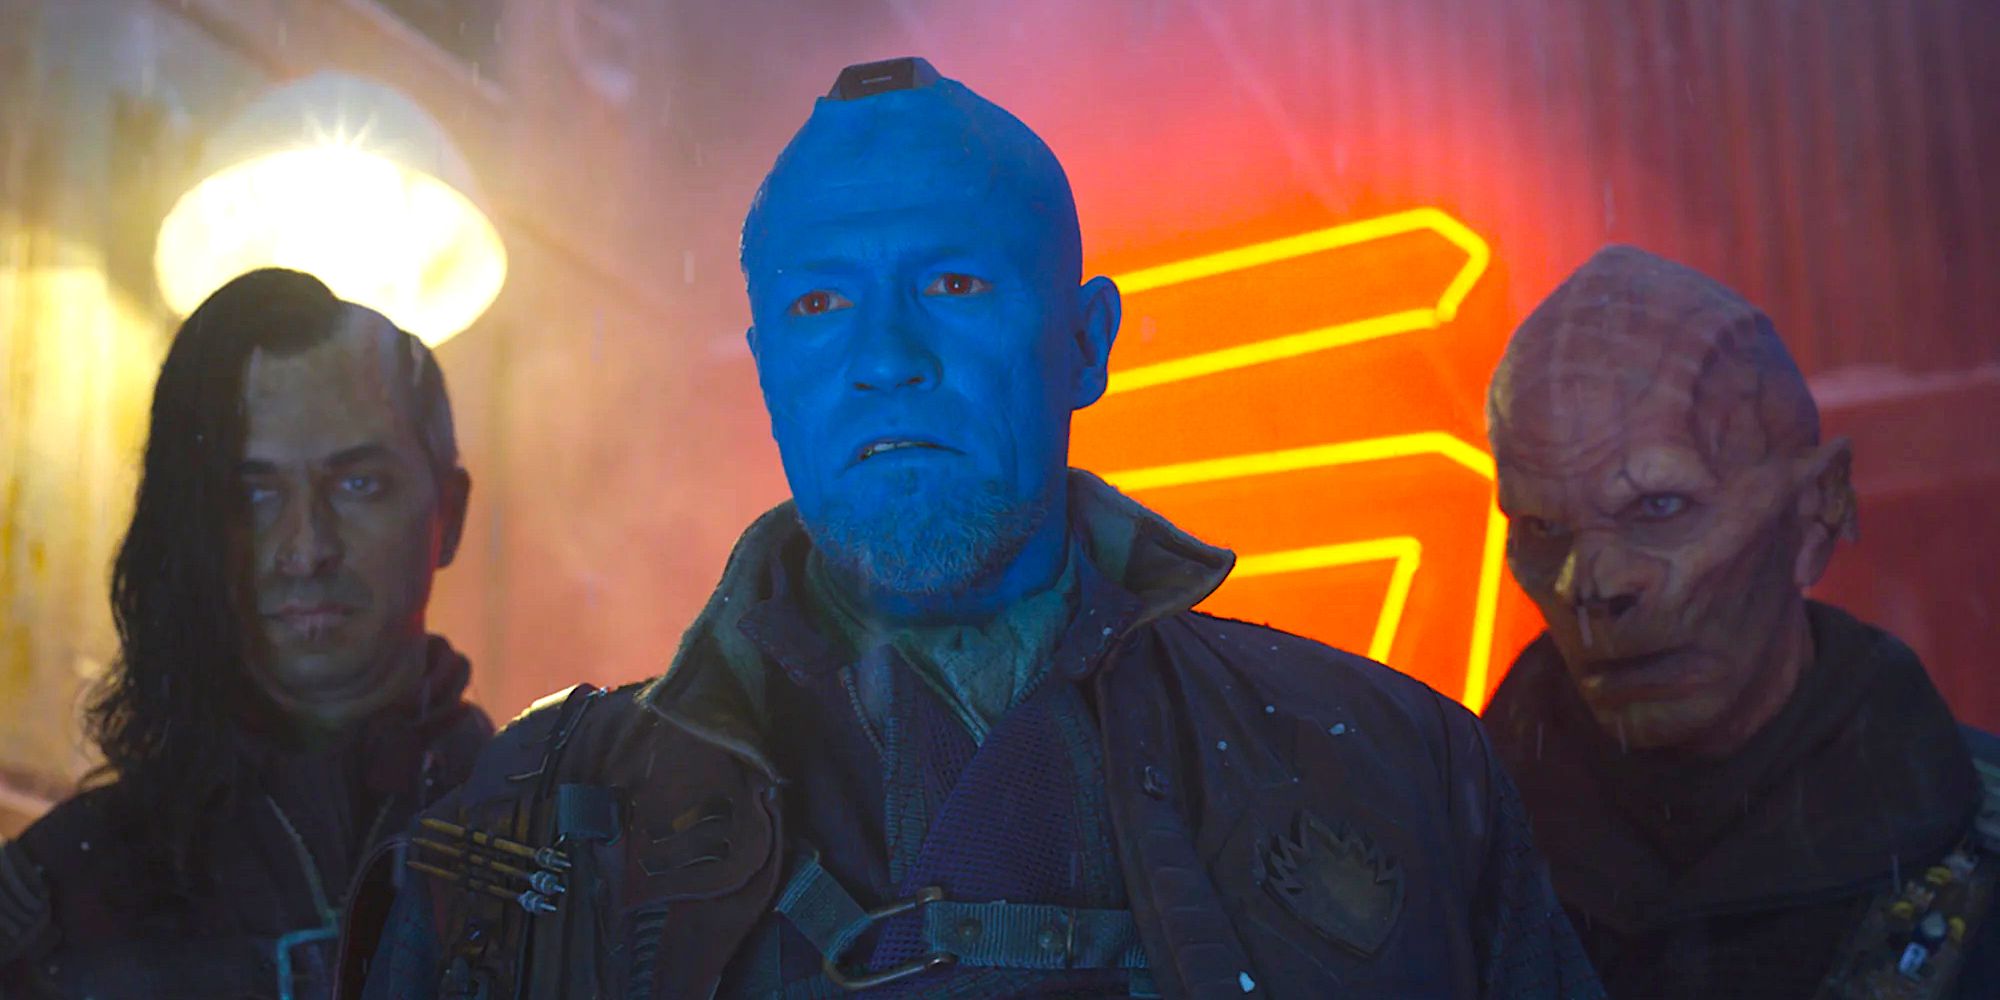 Guardians of the Galaxy 2 Ravagers including Michael Rooker as Yondu and Stephen Blackehart as Brahl